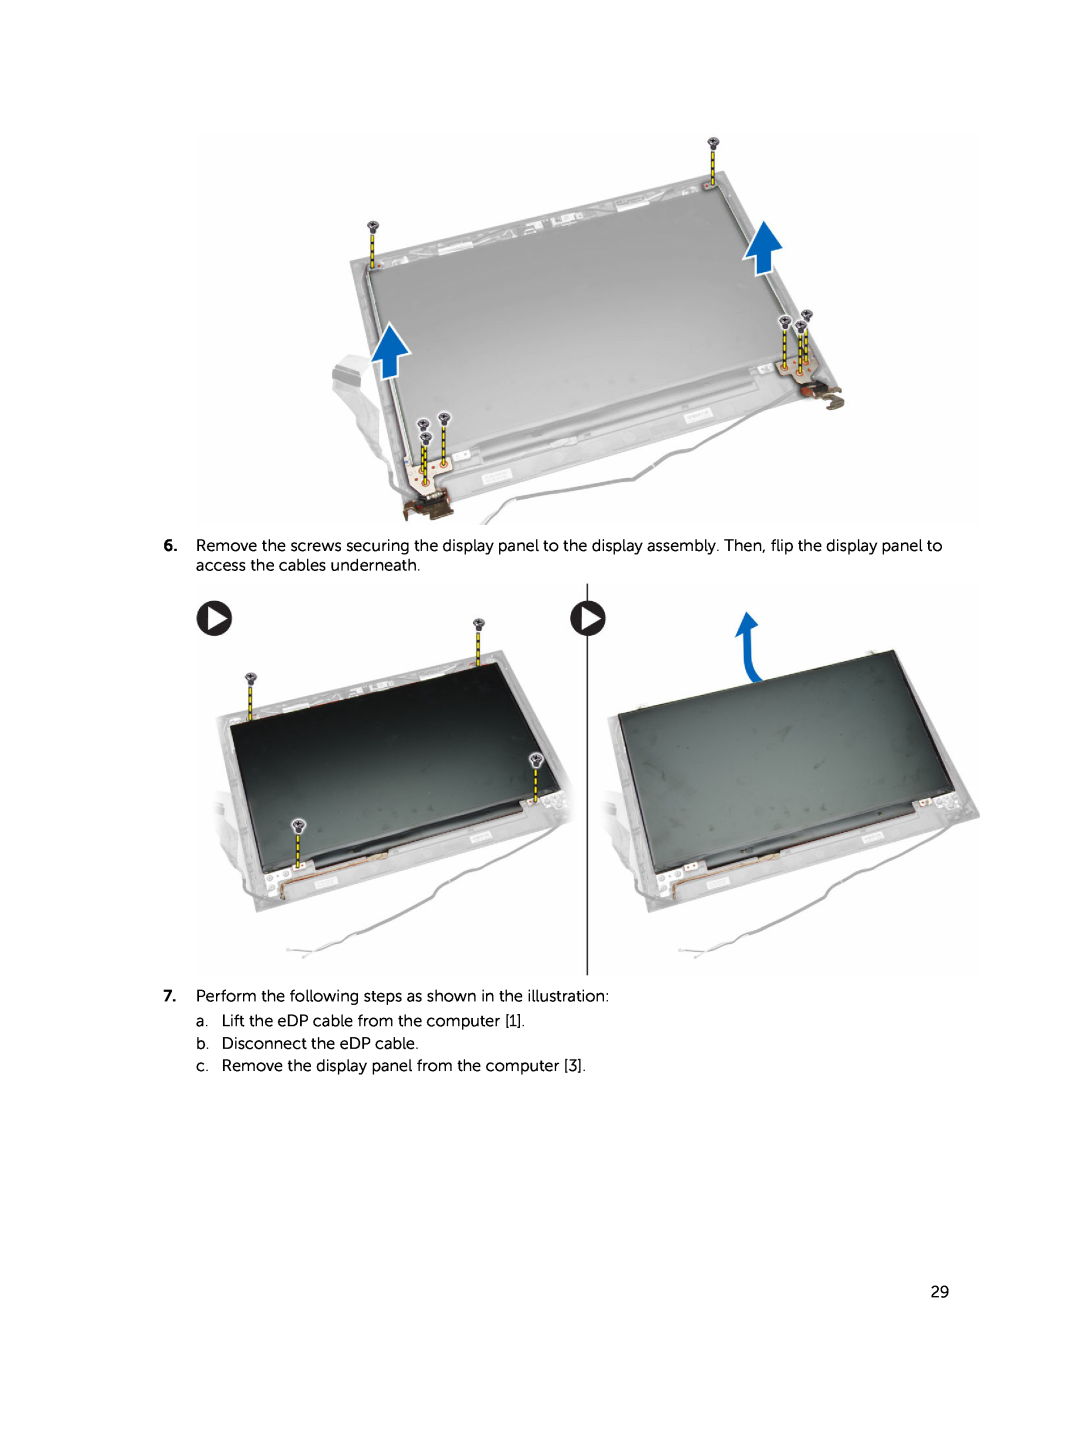 Dell P45F001 Perform the following steps as shown in the illustration, c. Remove the display panel from the computer 